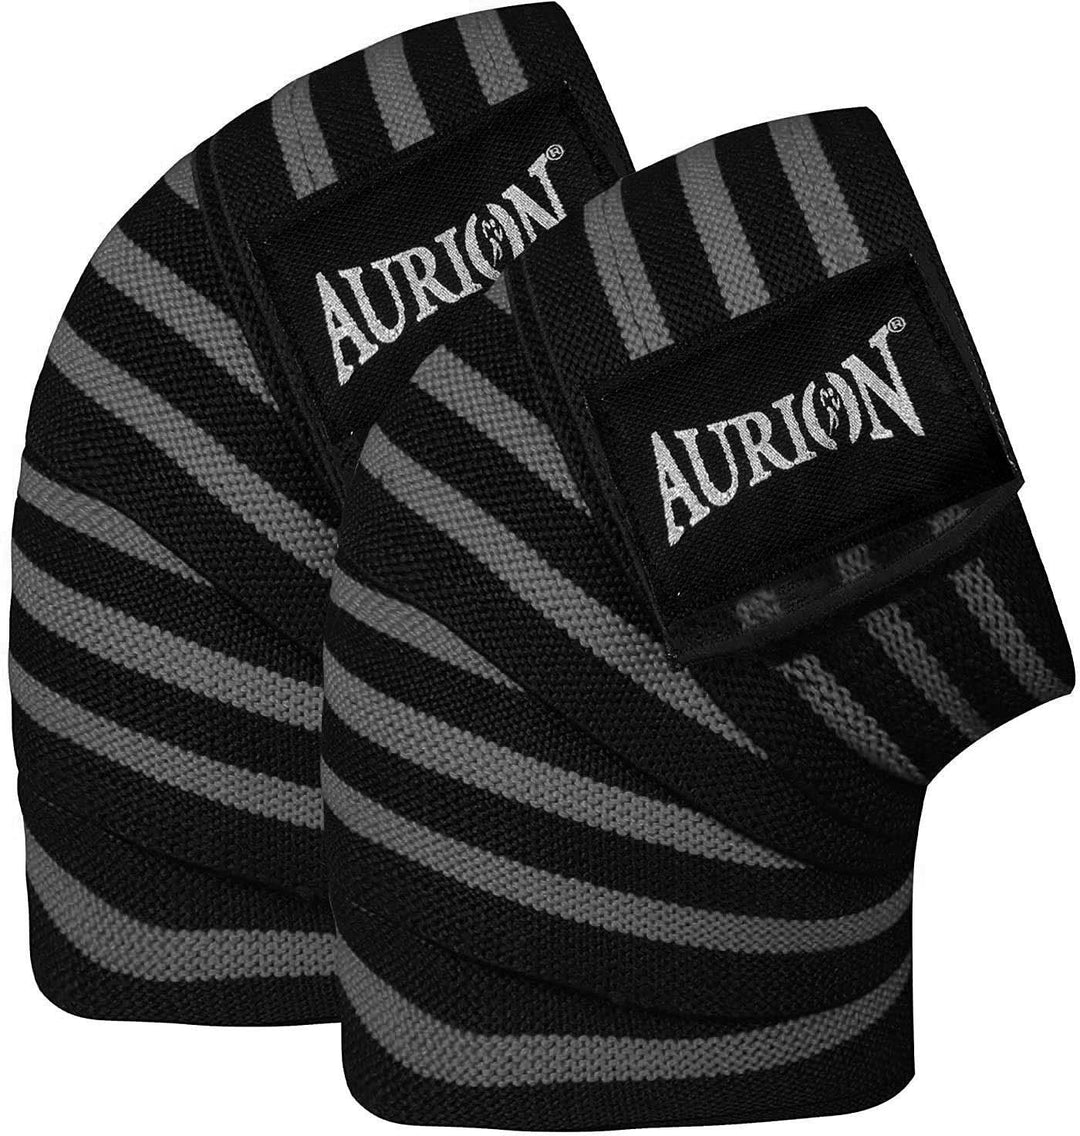 Aurion by 10Club Knee Wraps - 1Pair (Black | 78 Inches | 199 cm) | Cross Training Gym Workout Weightlifting | Knee Straps for Squats | 78"-Compression and Elastic Support | Weightlifting for Men & Women